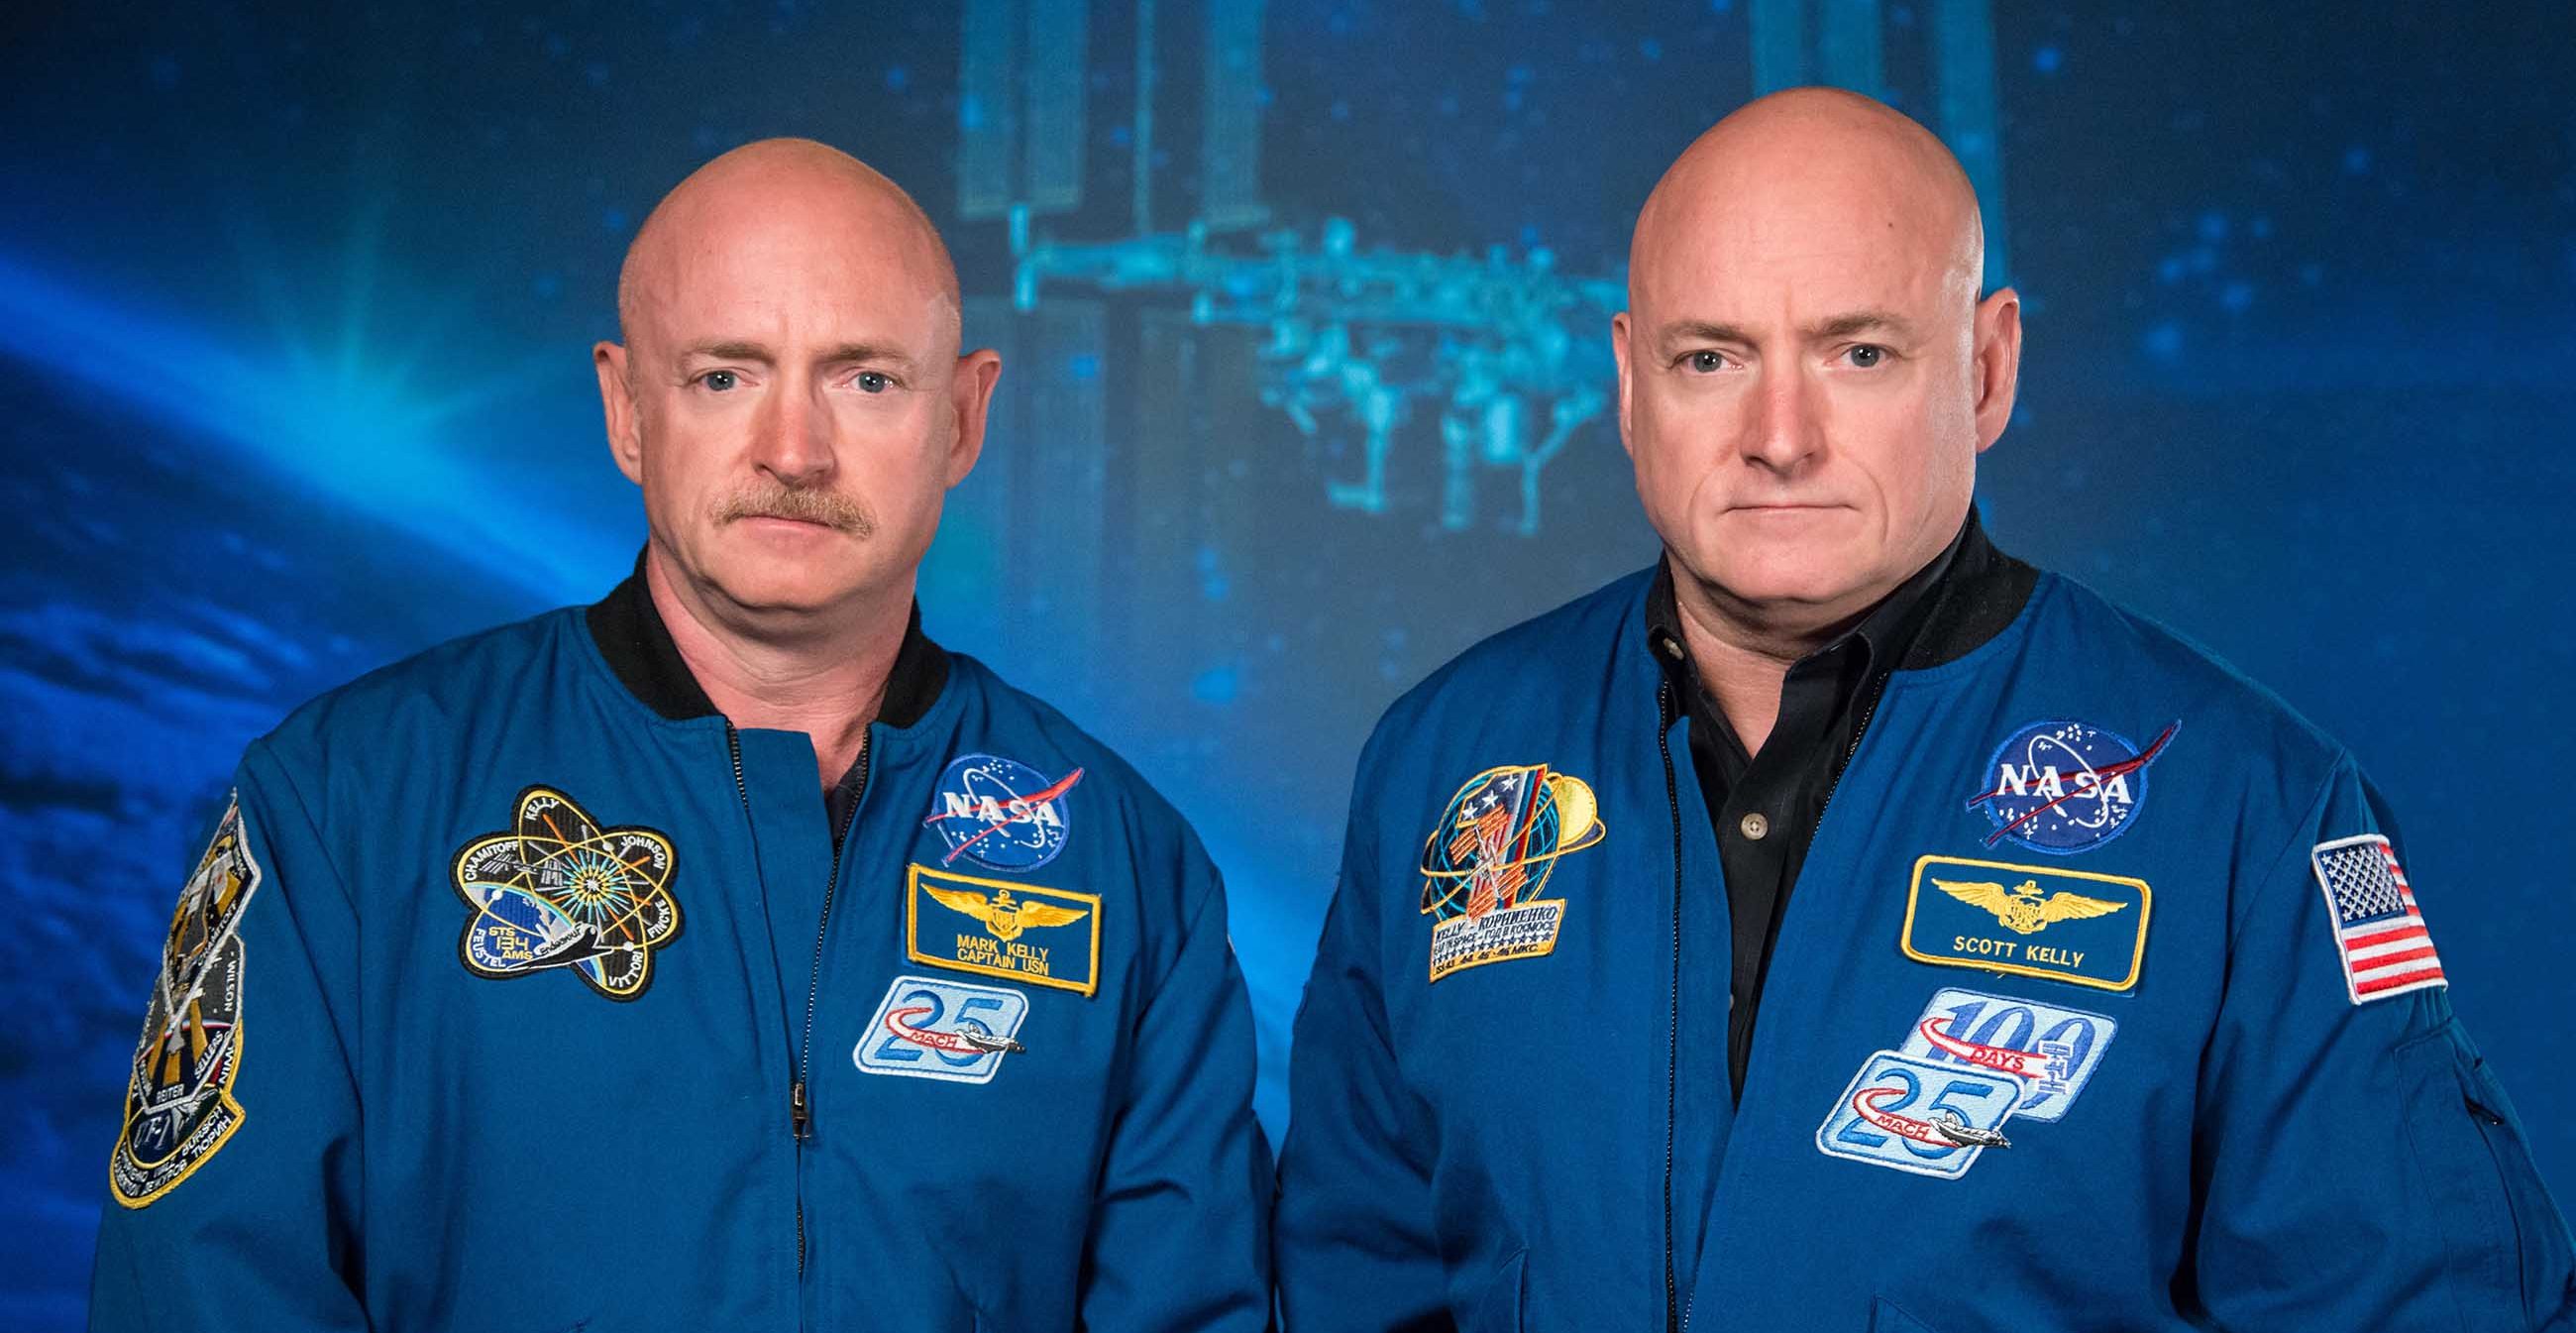 From March 2015 to March 2016, astronaut Scott Kelly (right) spent a year on board the International Space Station, while his brother, astronaut Mark Kelly (left), remained on Earth.